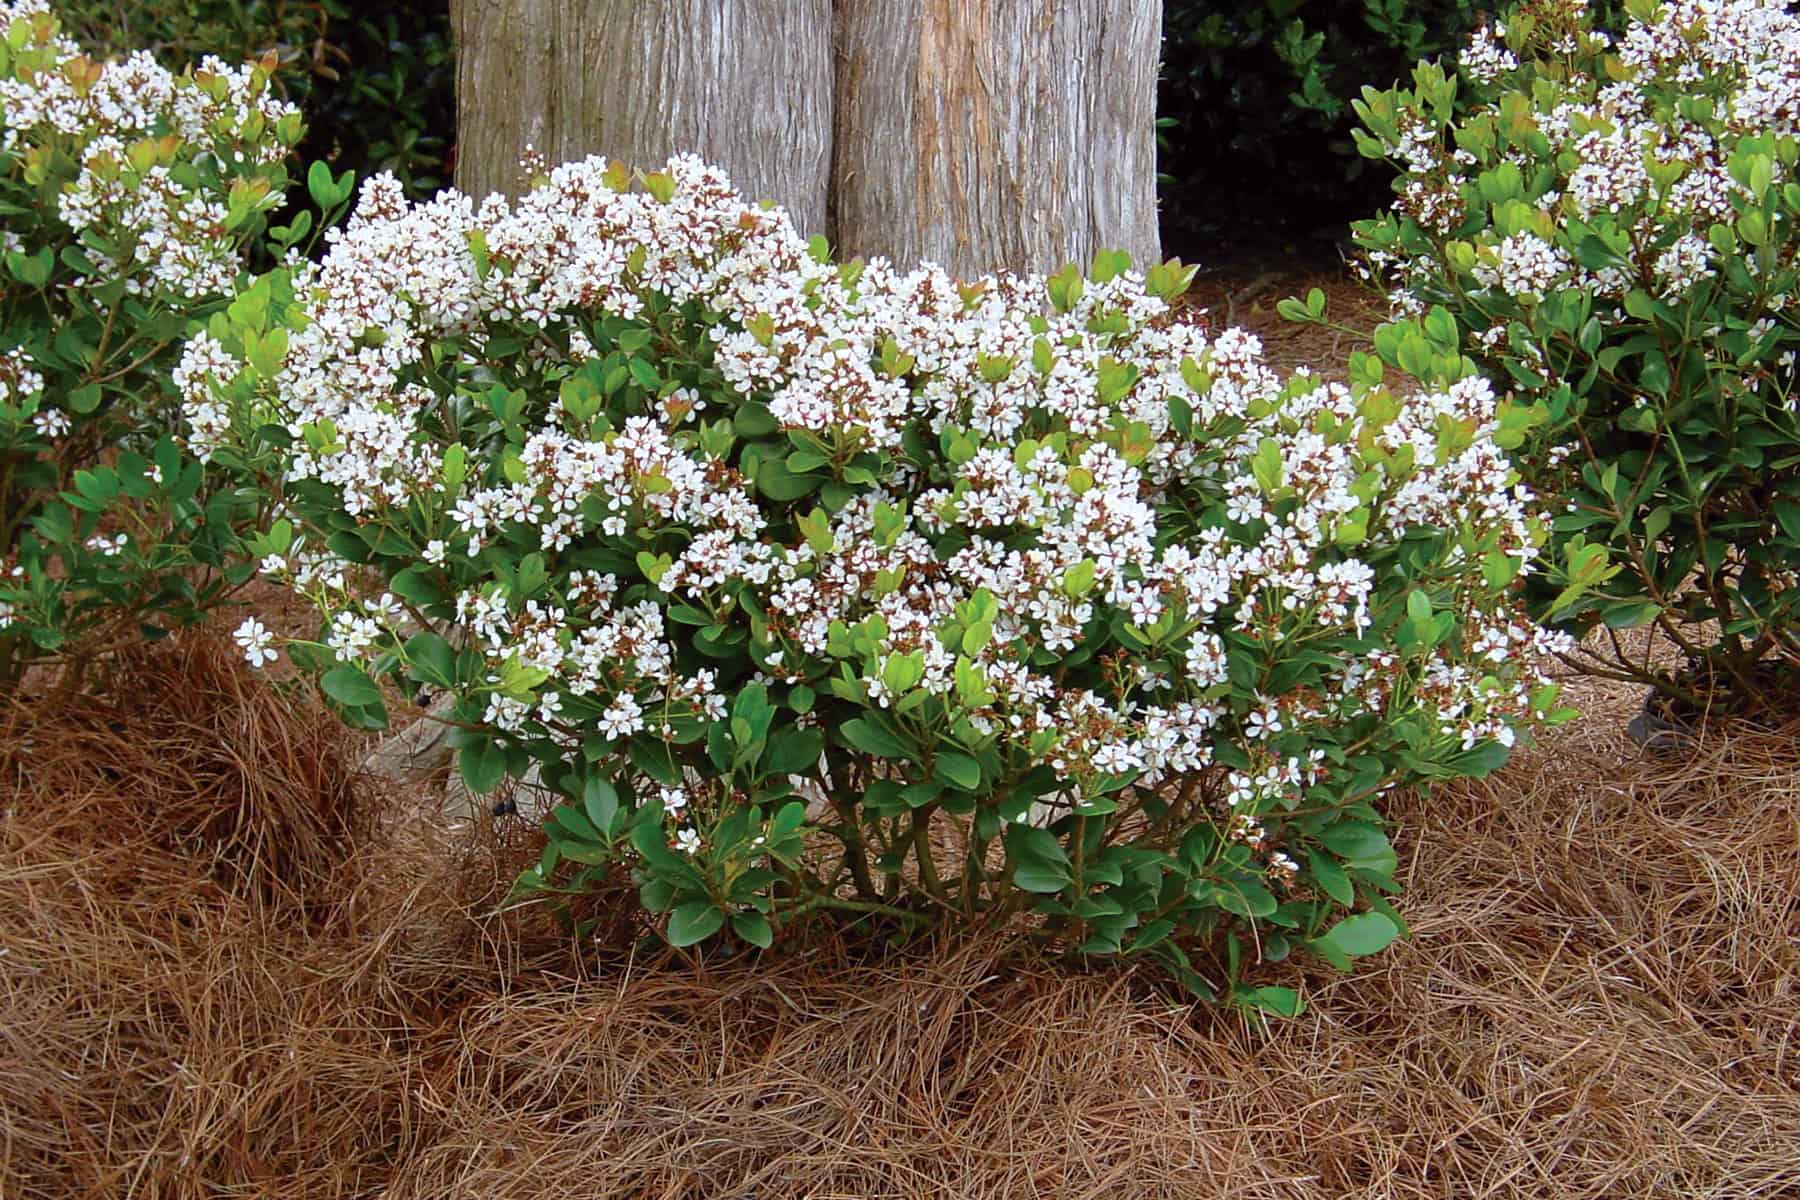 Spring Sonata Indian Hawthorne white flowers with redish stems in garden with pine straw